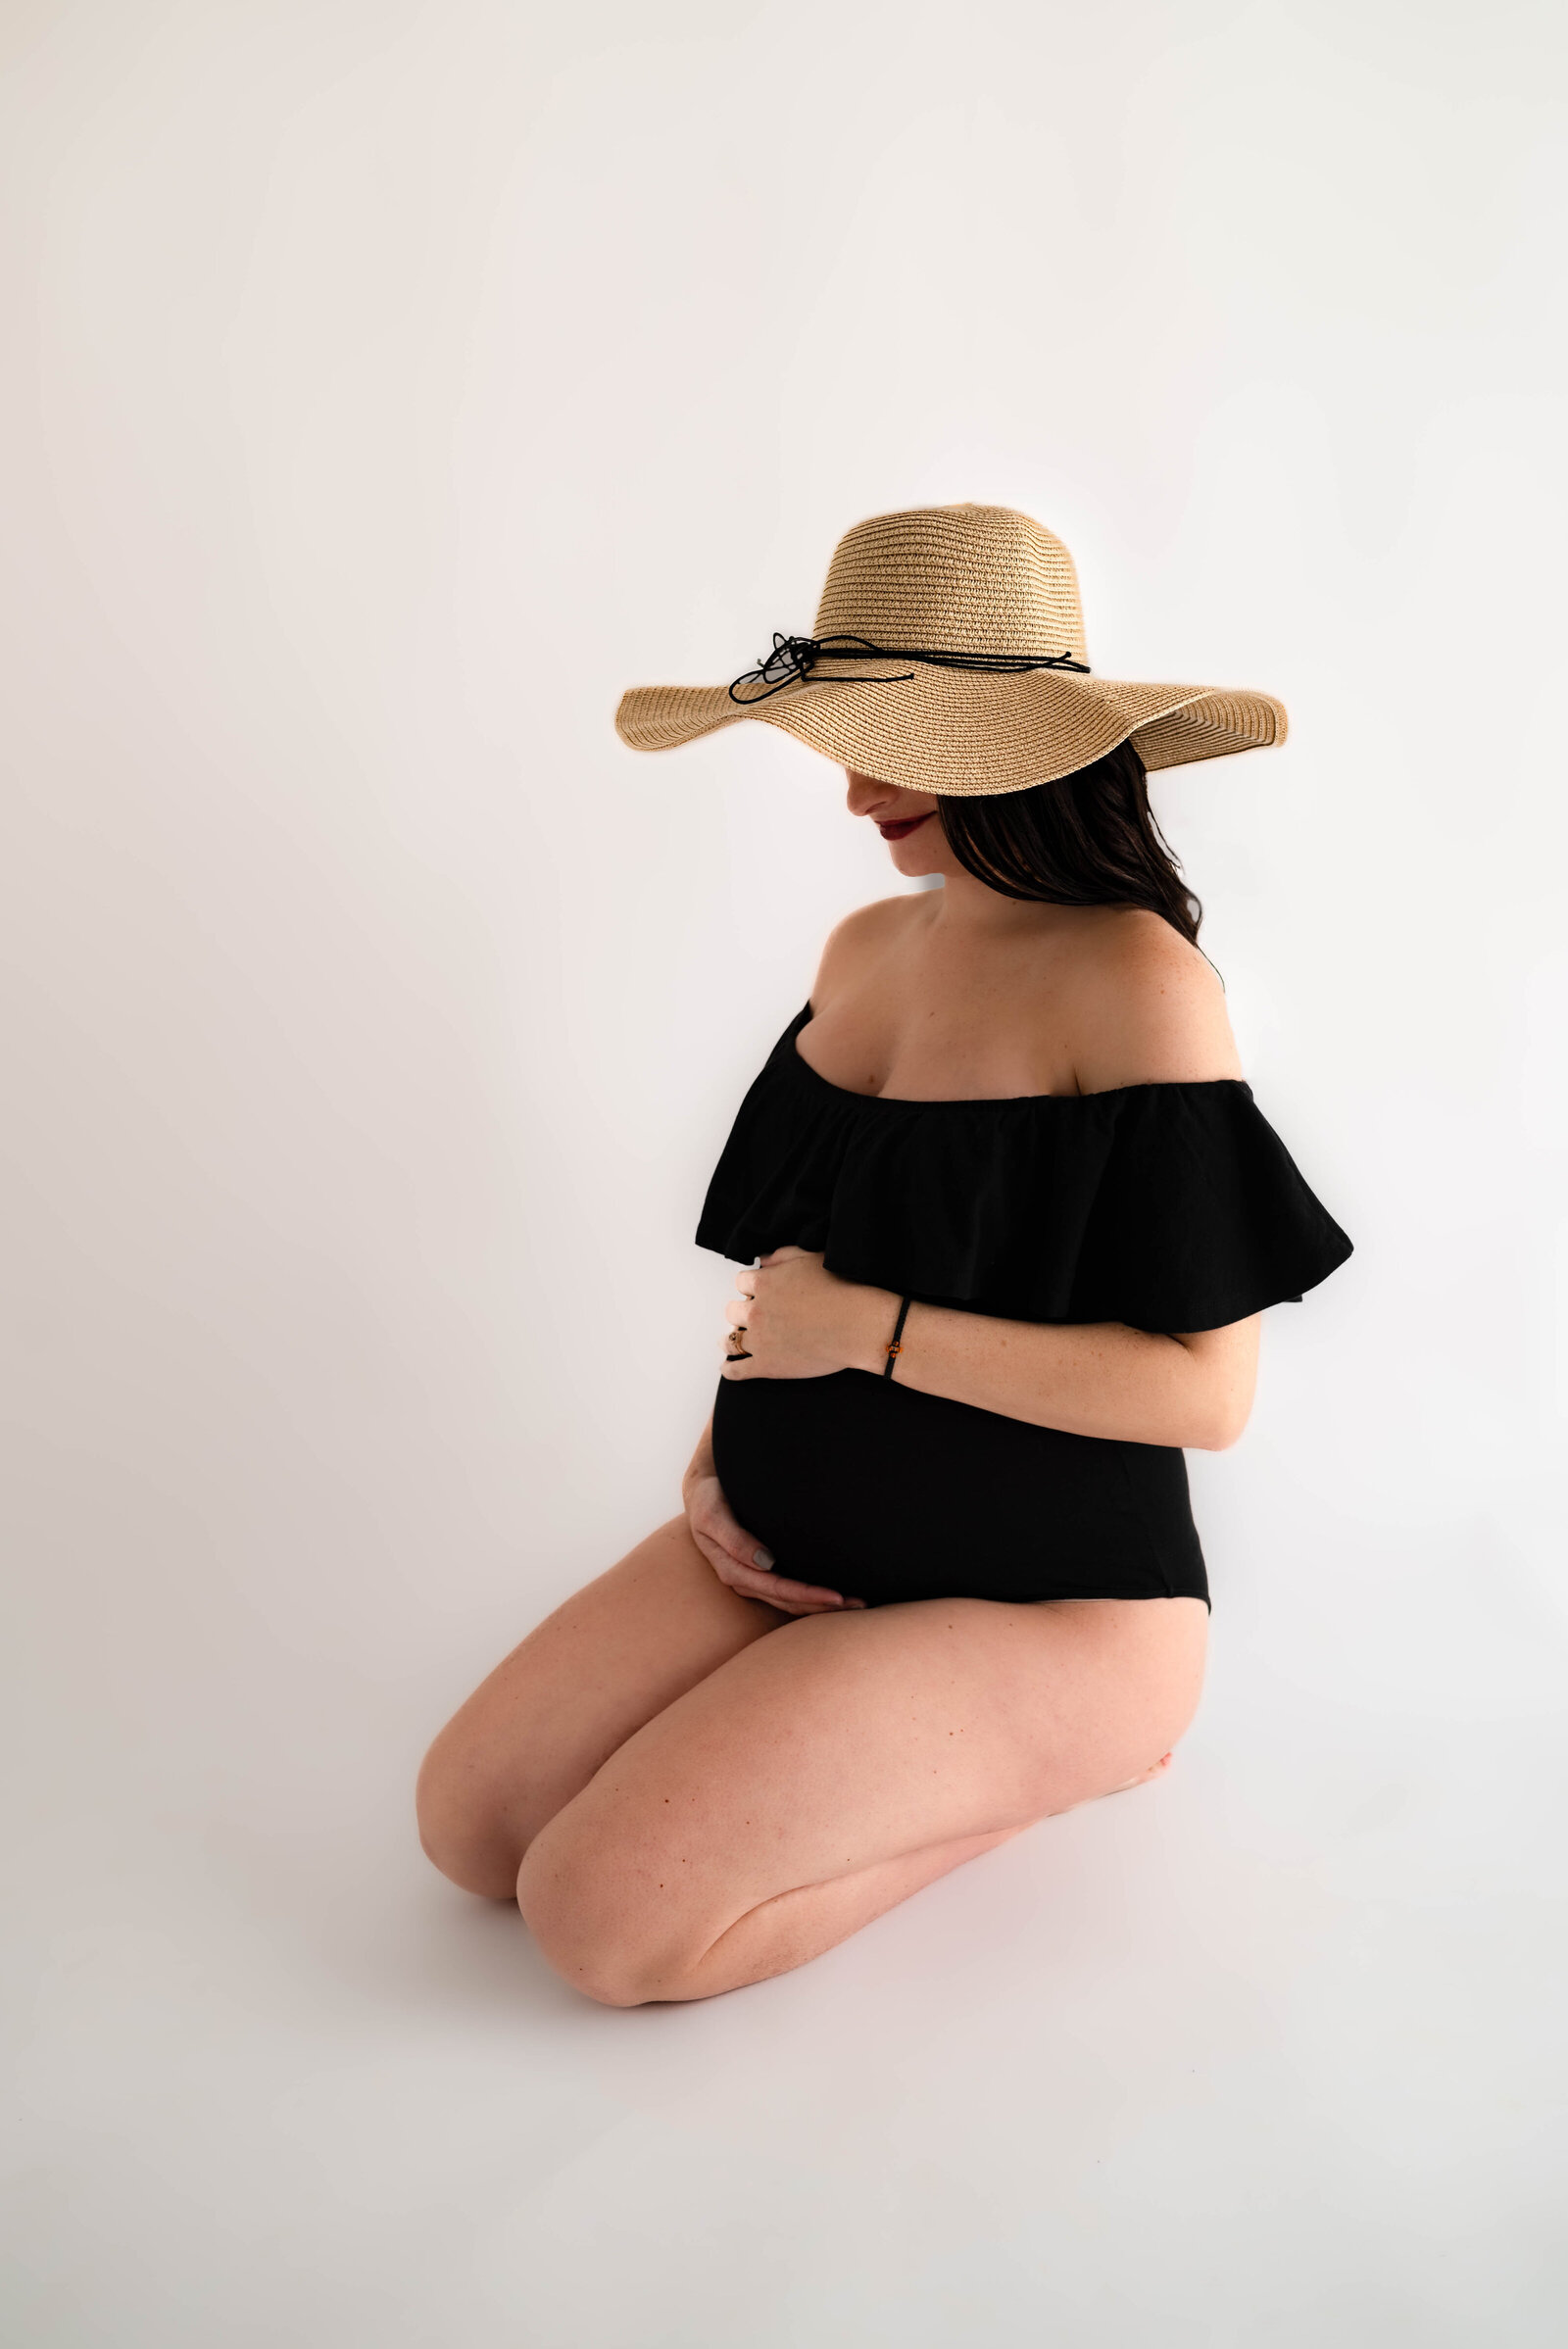 A pregnant woman wearing a black body suit and tan hat kneeling on the floor for her Huntsville Alabama studio maternity pictures